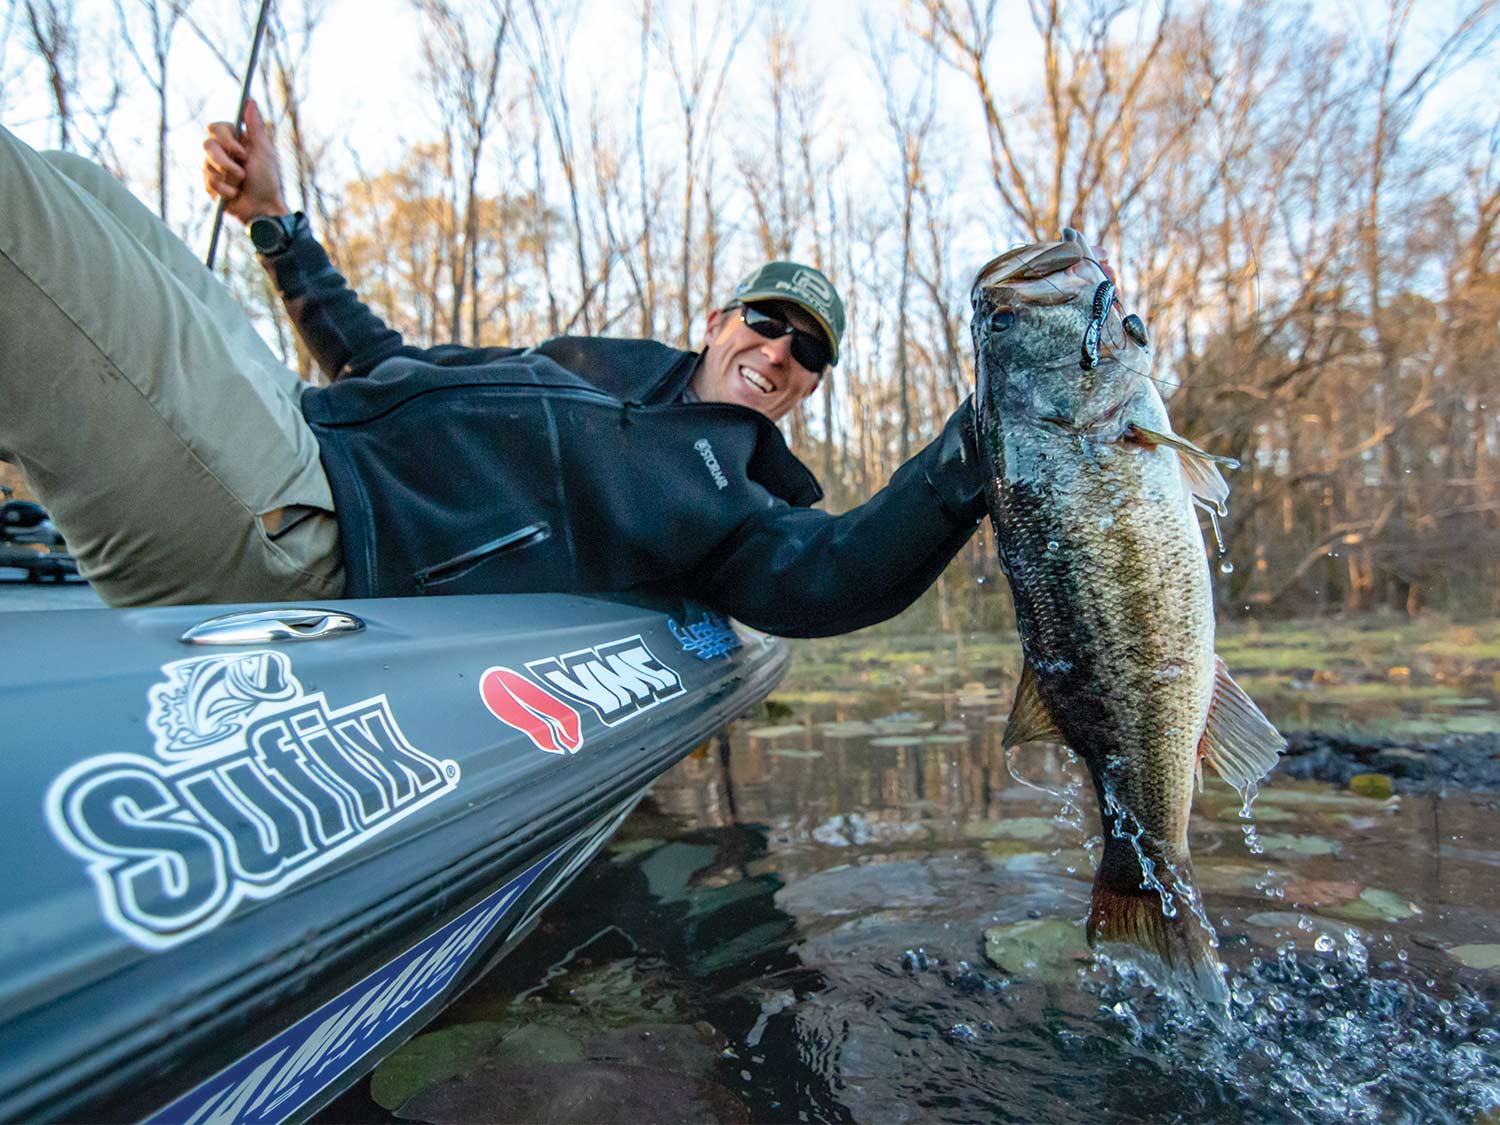 Patrick Walterns on the side of a boat hoisting a largemouth bass from the water.